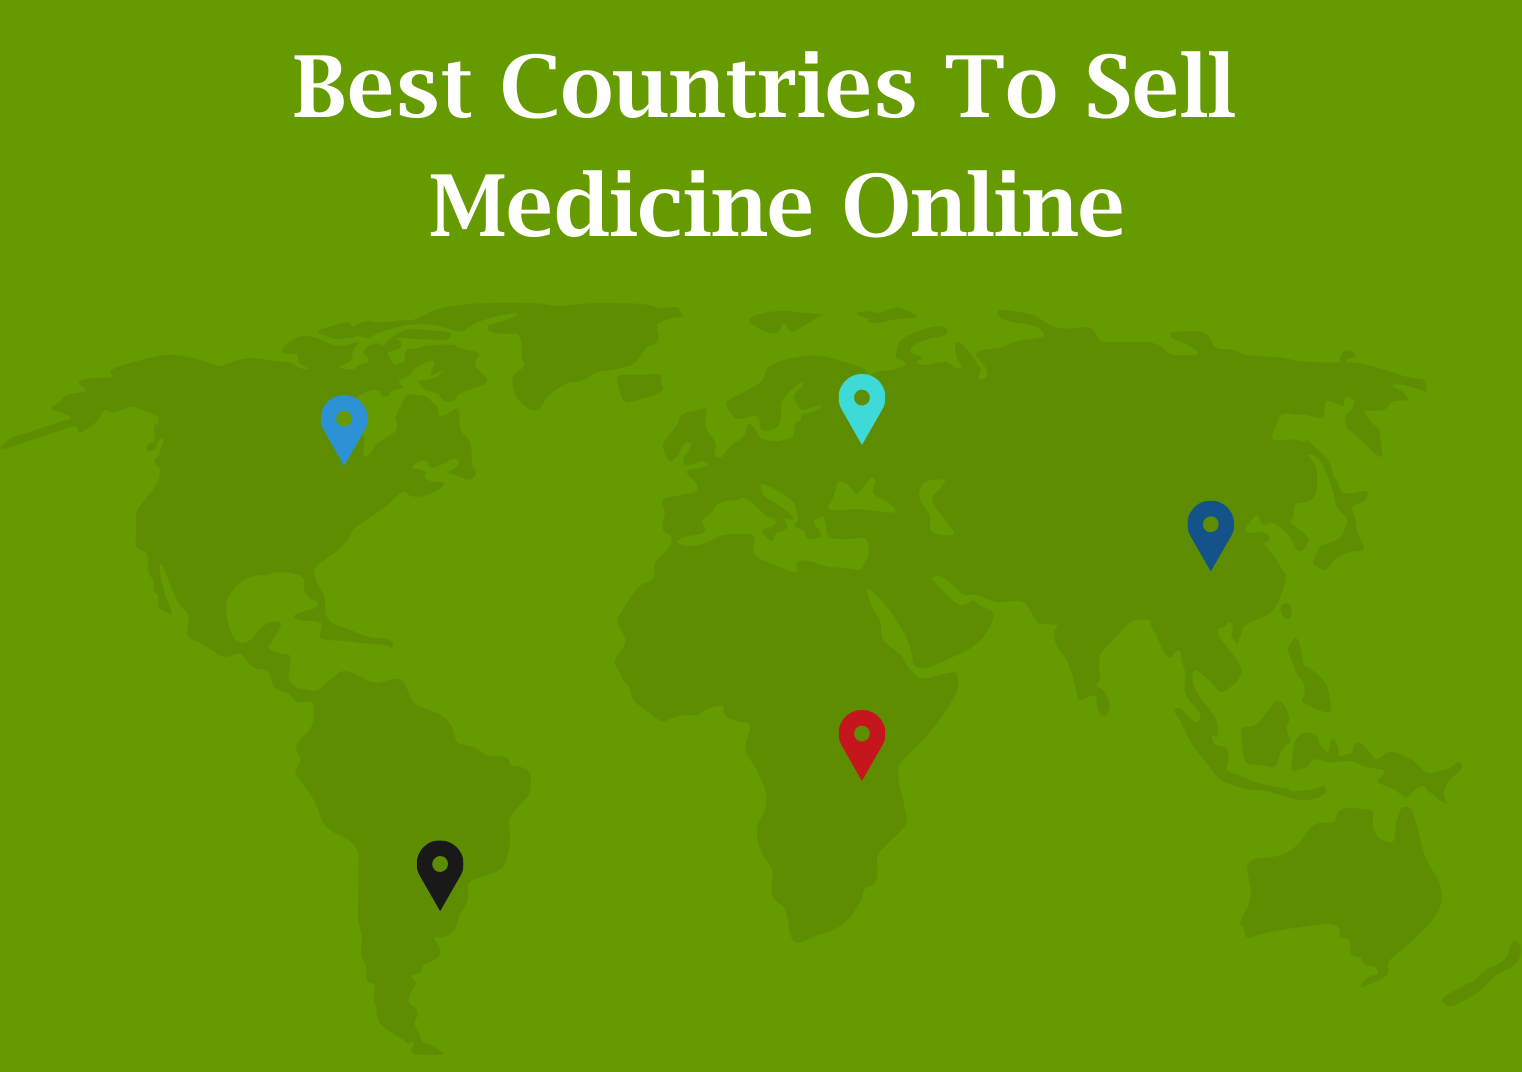 Best countries to sell medicine online